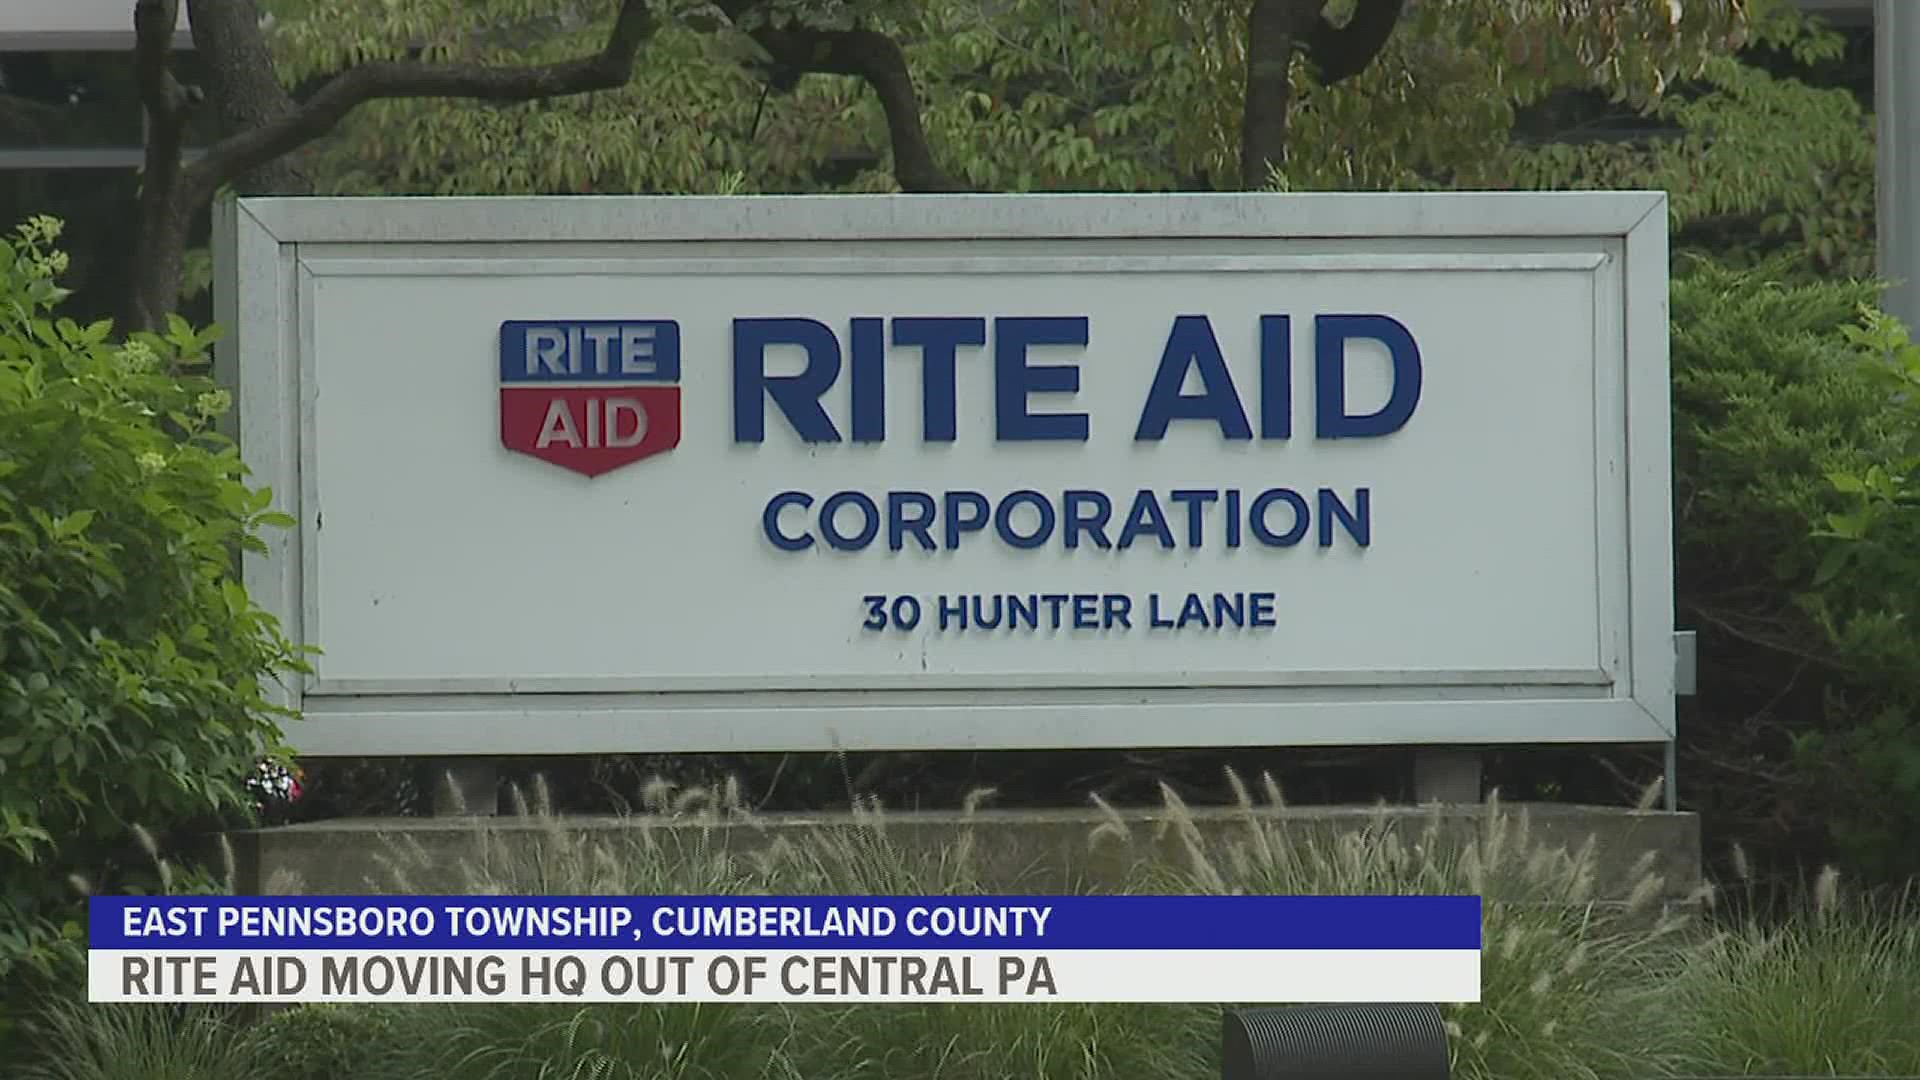 Rite Aid is moving its headquarters out of Camp Hill and is transitioning to a mostly remote working model for its corporate associates.